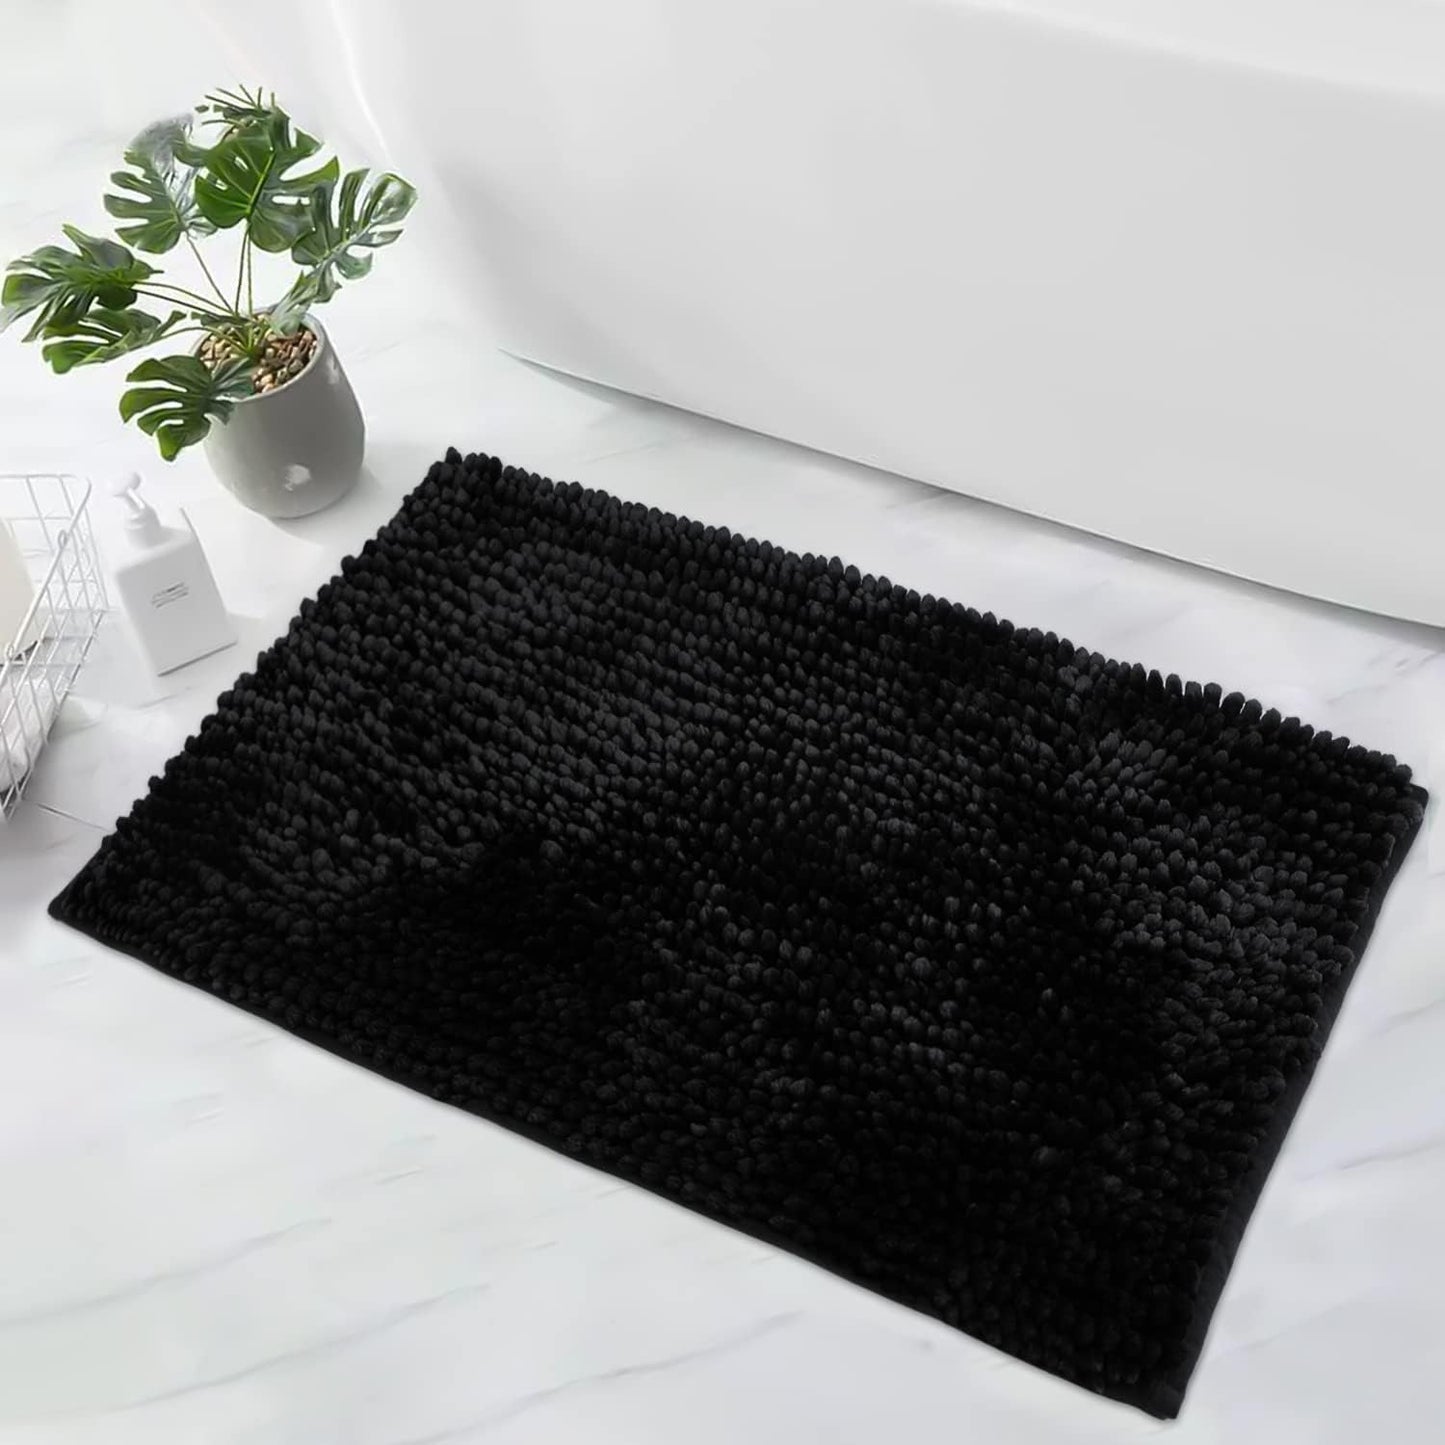 Brand New Chenille Washroom Mat rug - Soft Non Slip Absorbent Bathroom Rugs with TPR Backing &nbsp;40 x 60cm►1.31 x 1.96ft